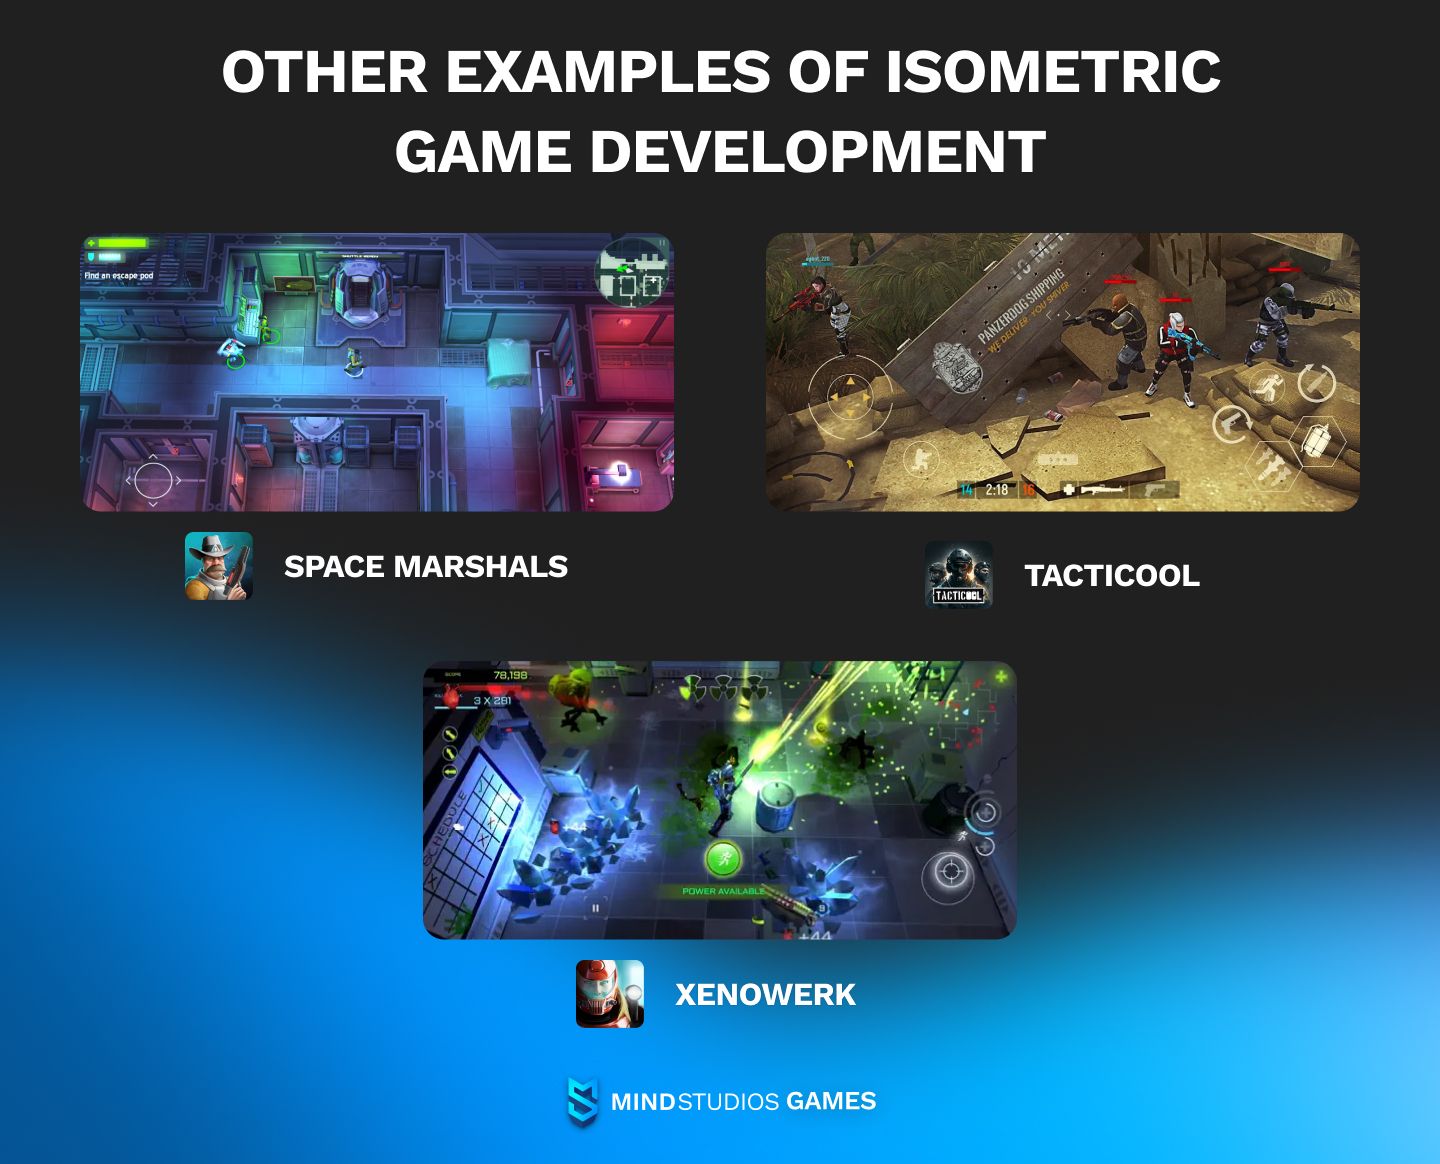 Other examples of isometric game development